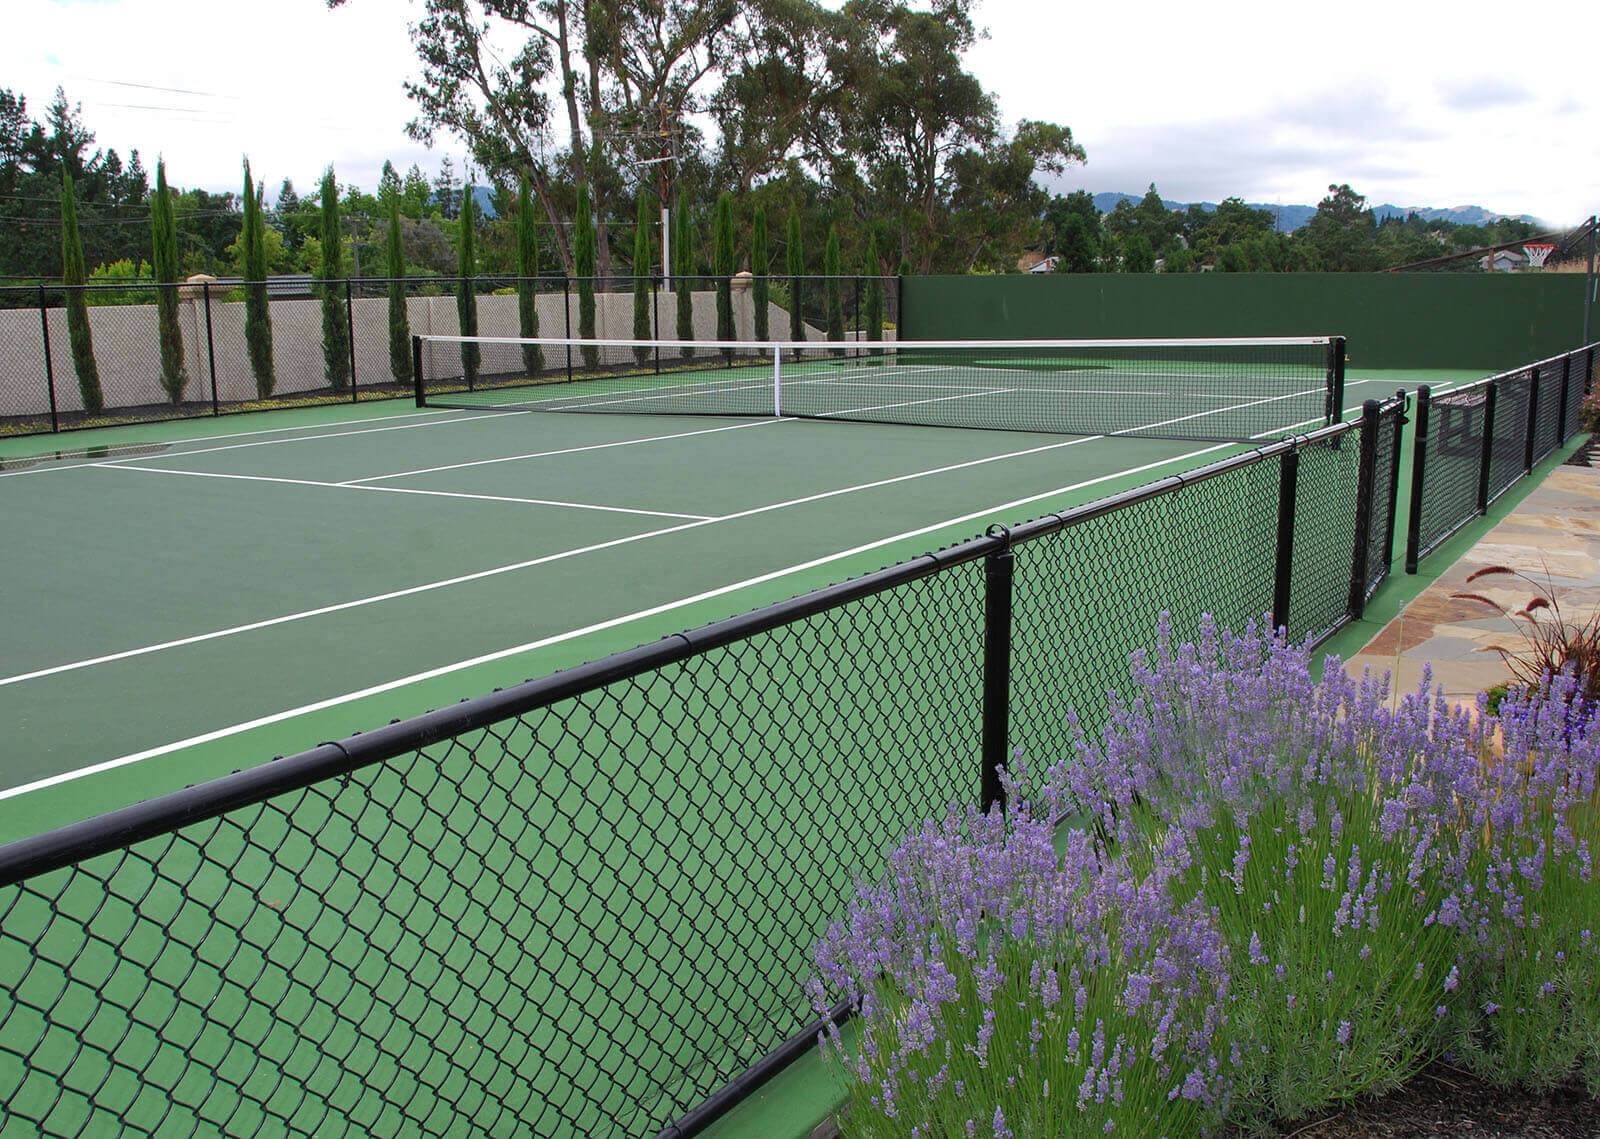 low fence private tennis court with stone walkway and surrounding greenery and lavender